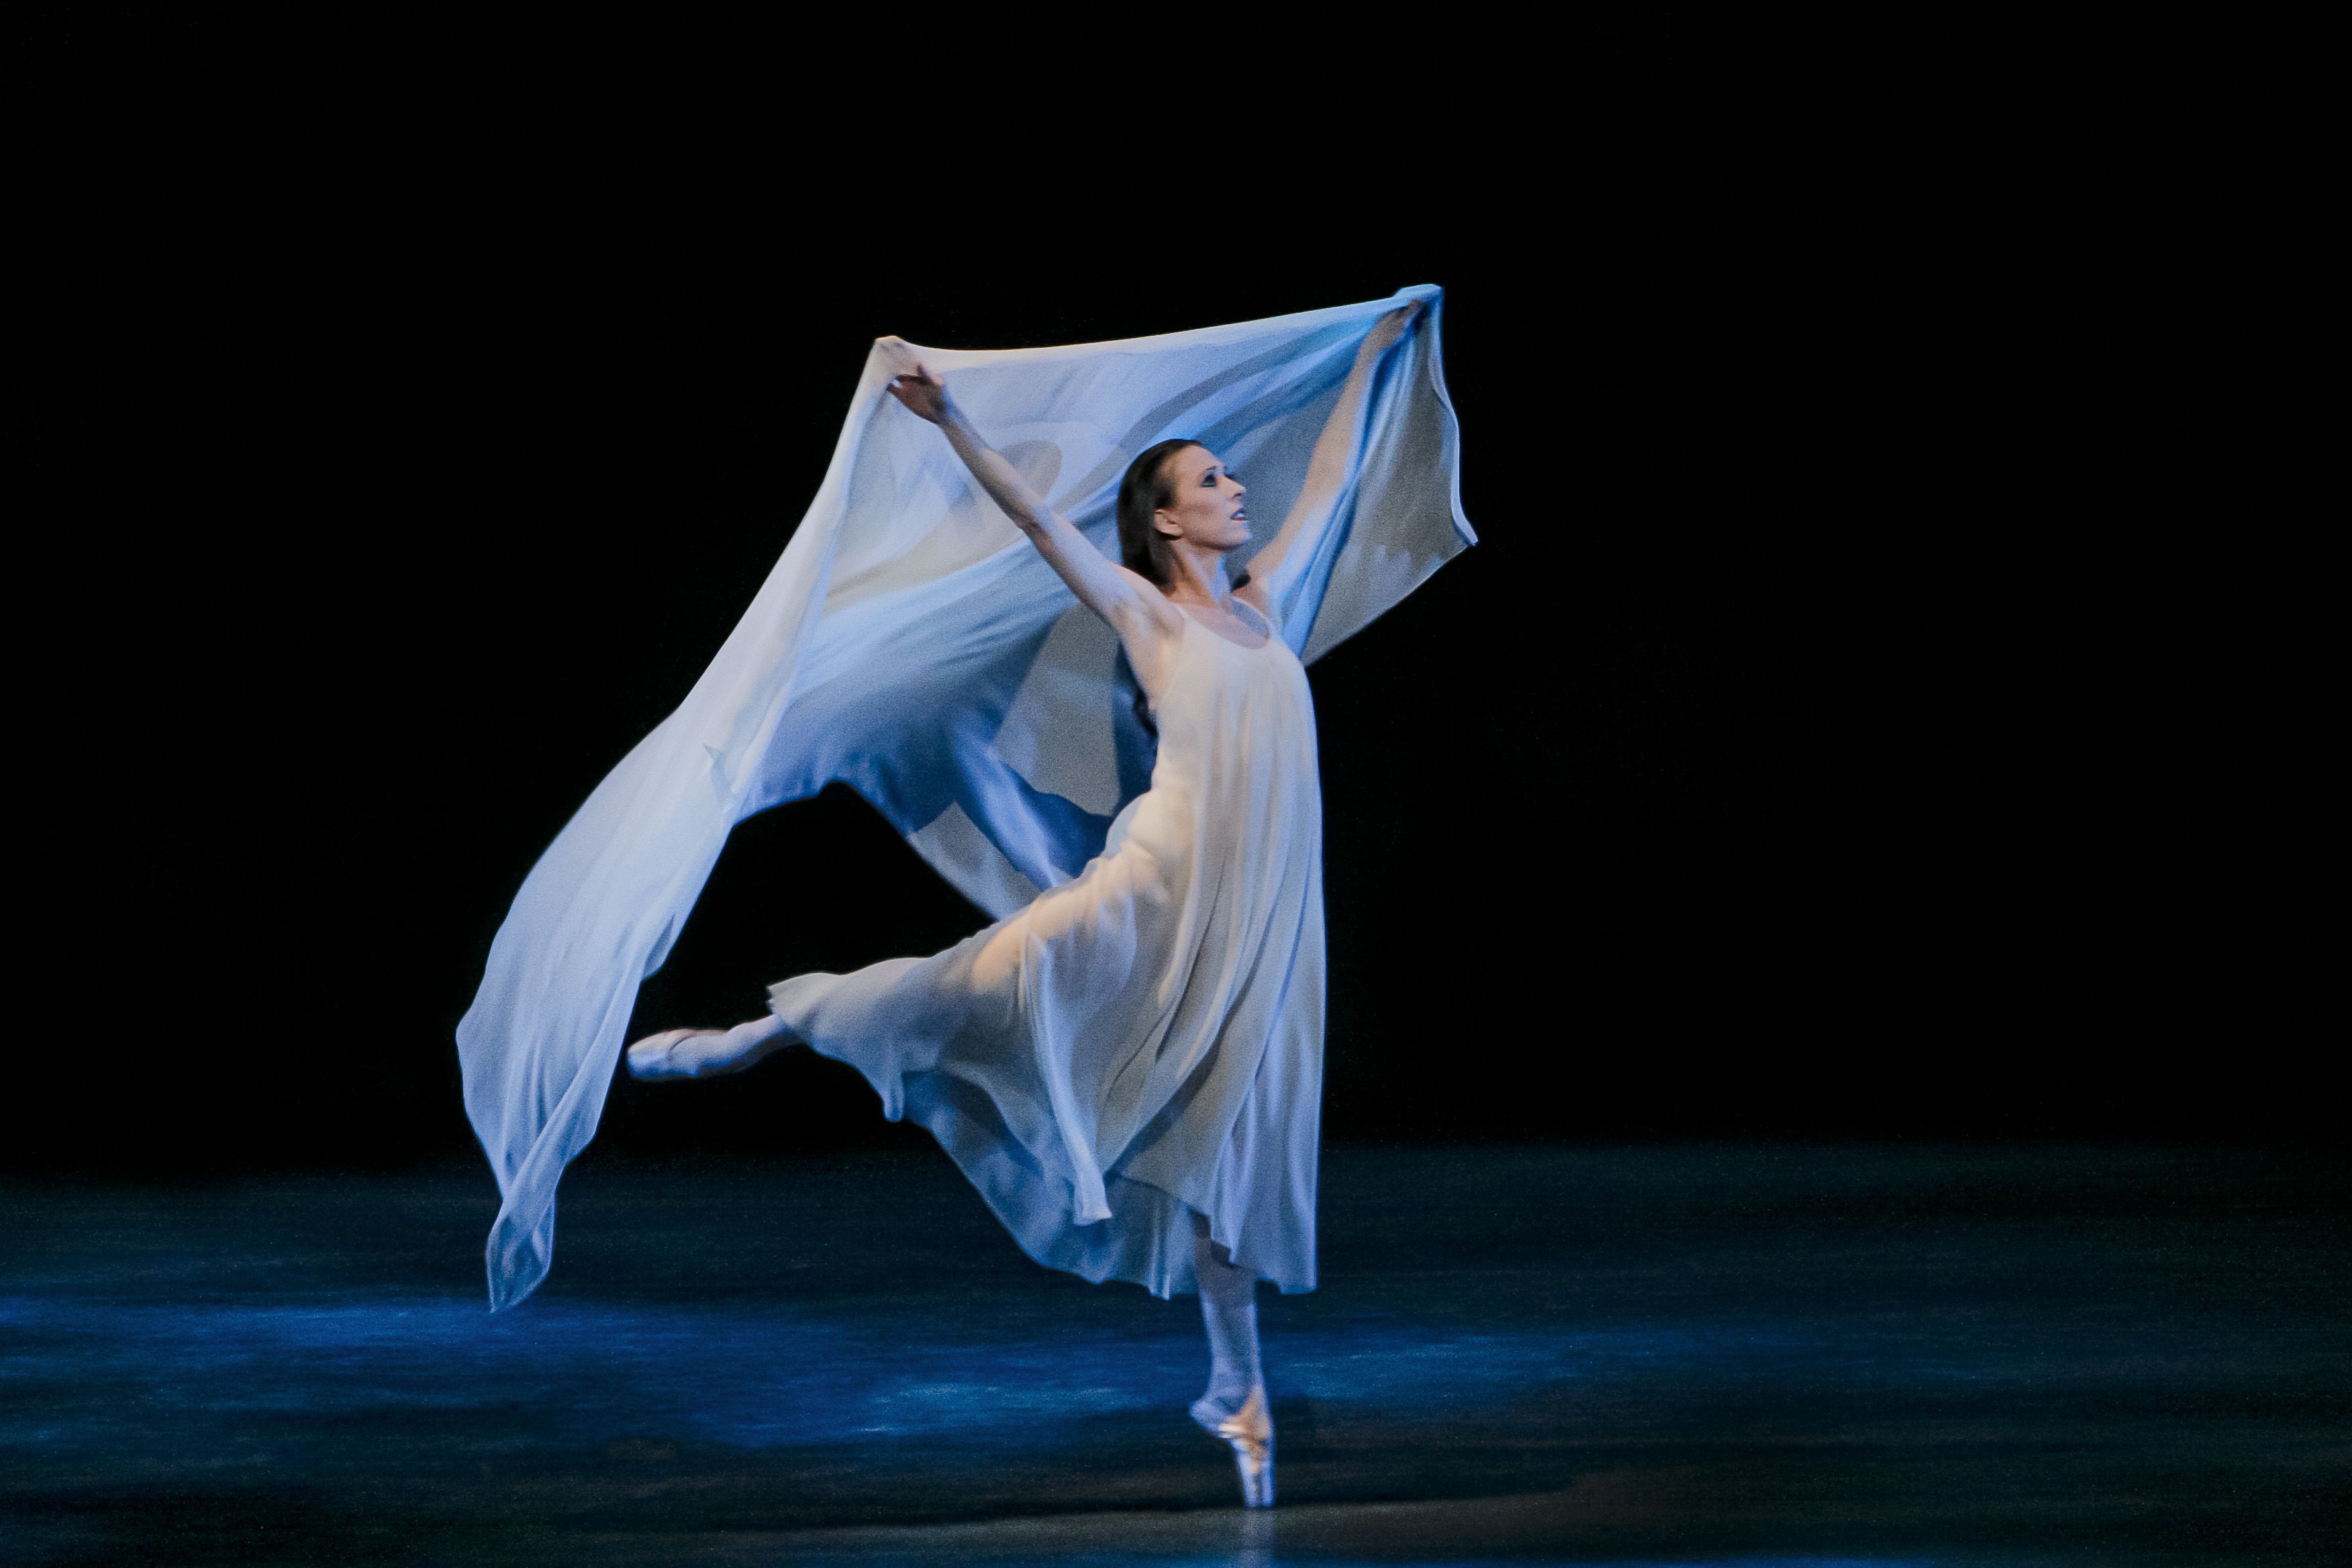 A woman in white is dancing on stage - Ballet